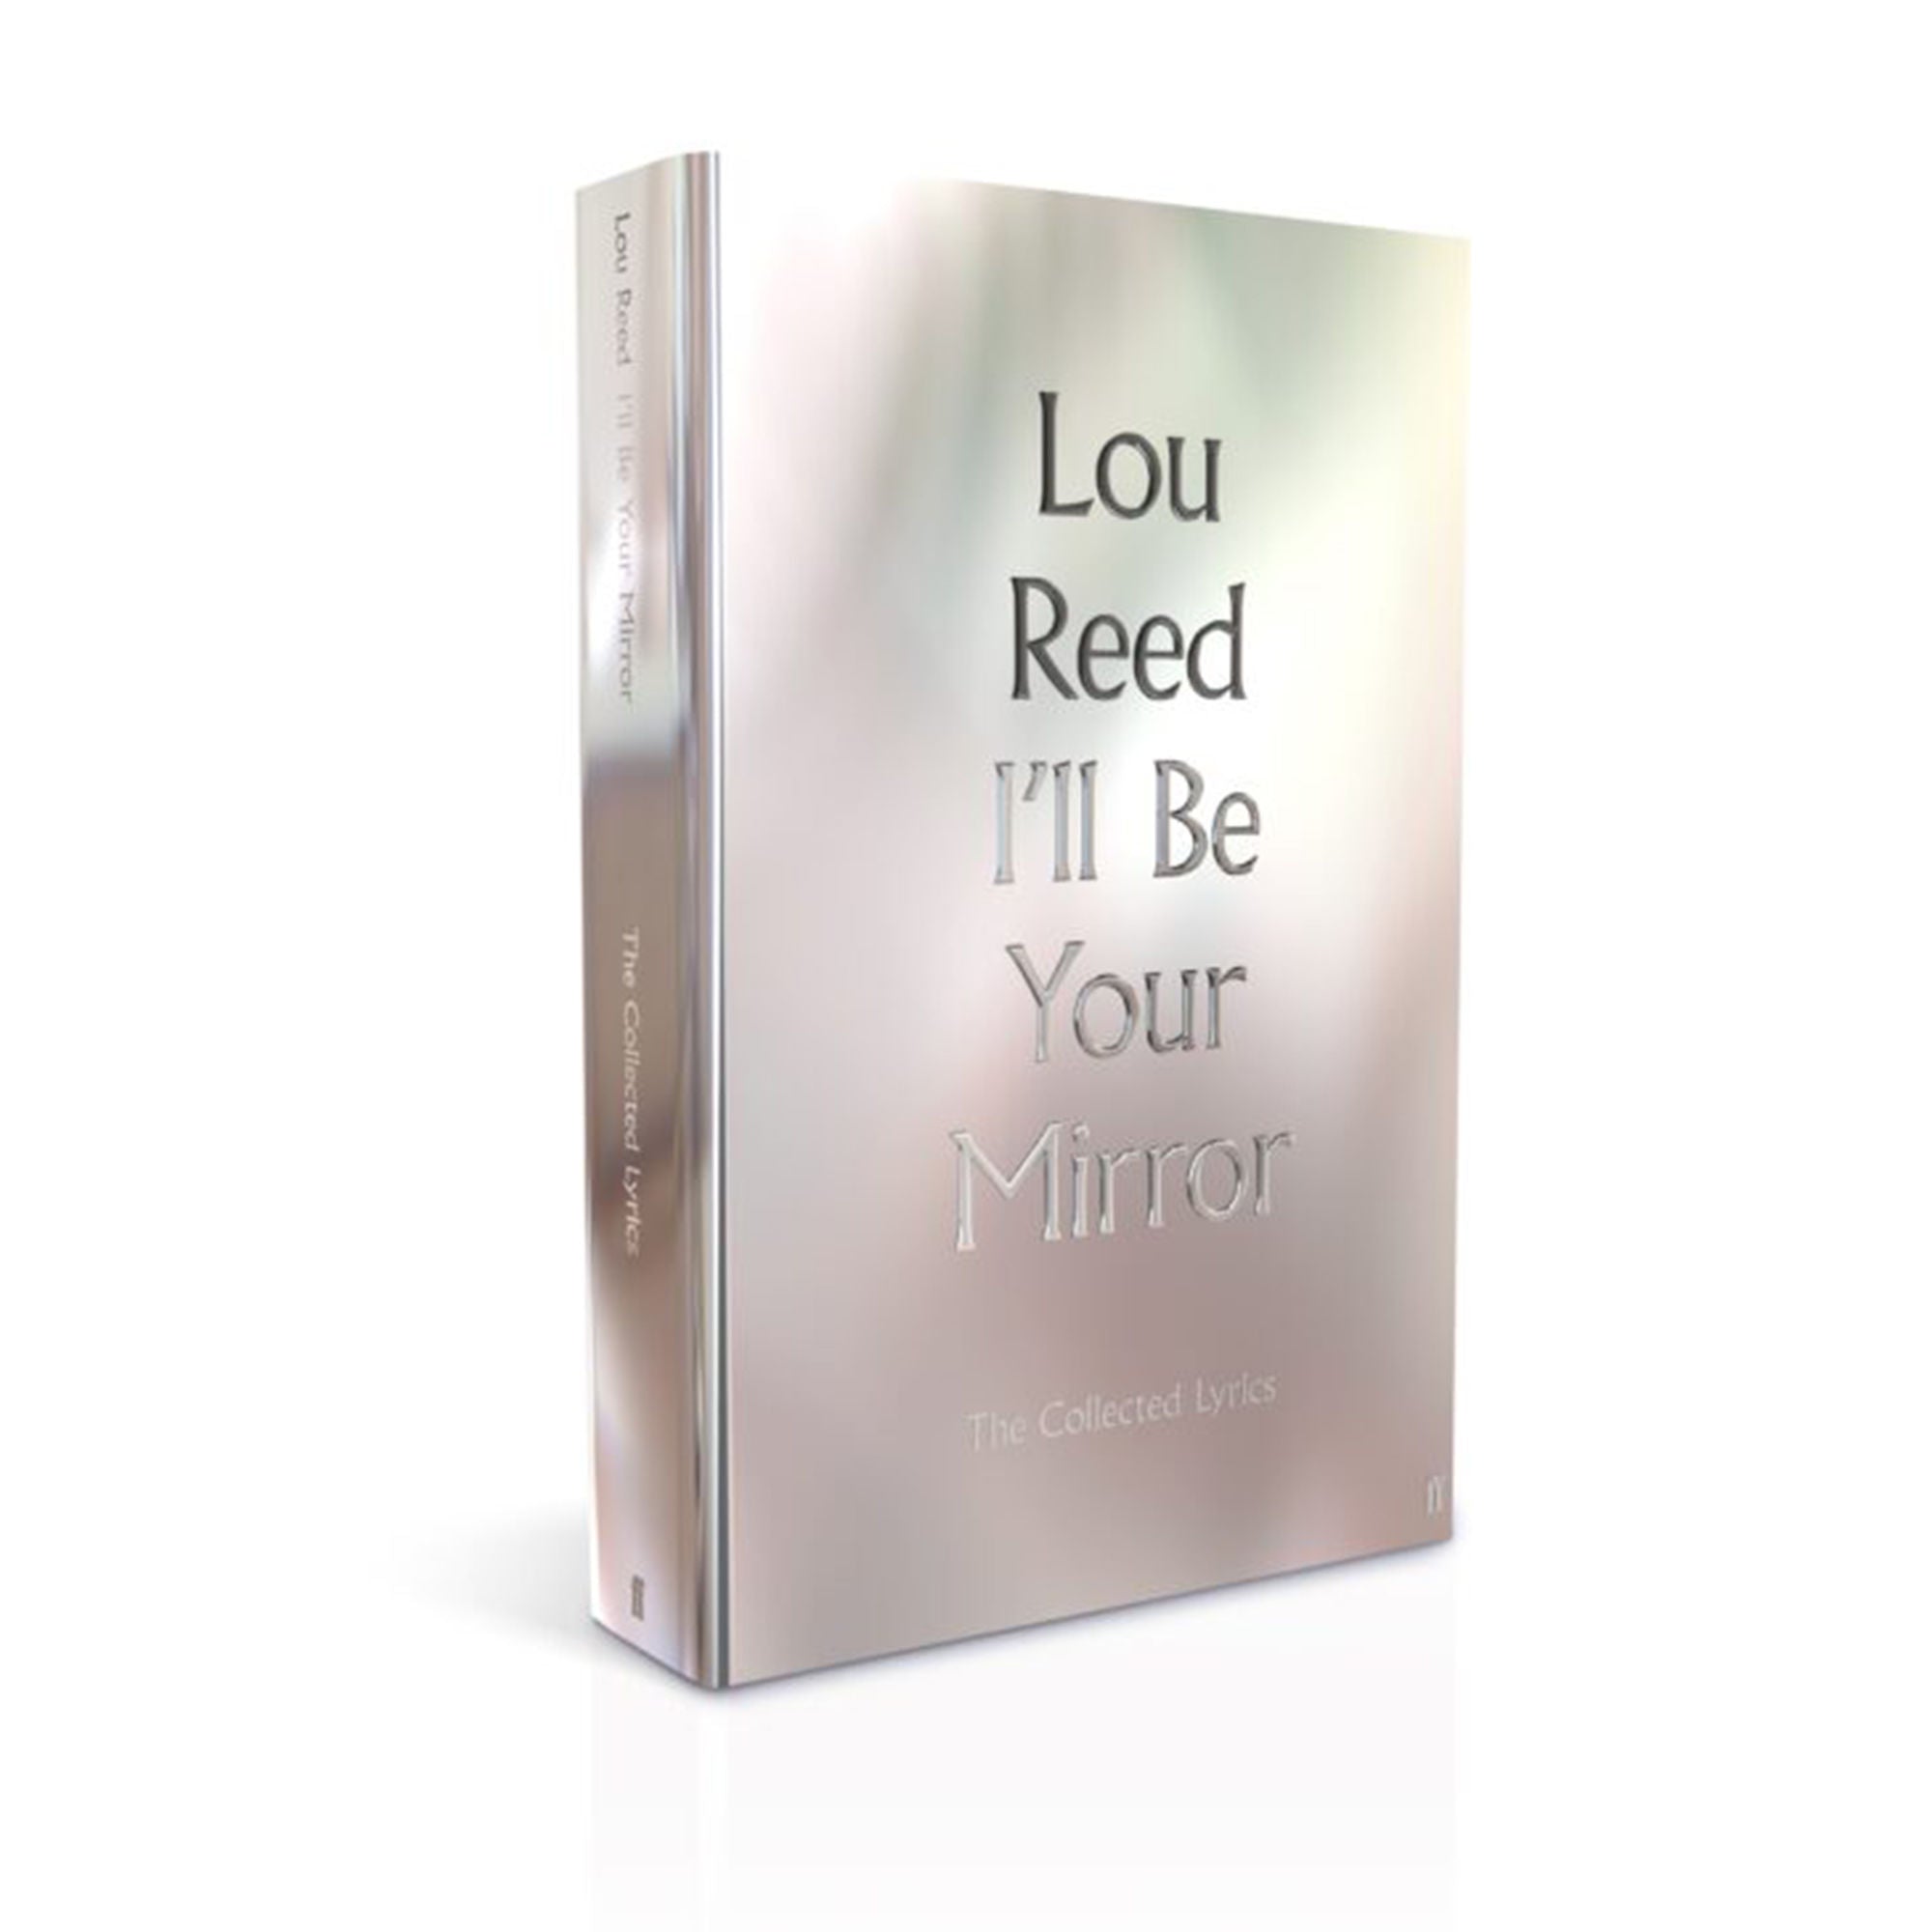 Lou Reed - I'll Be Your Mirror: The Collected Lyrics Limited Edition Hardback Book